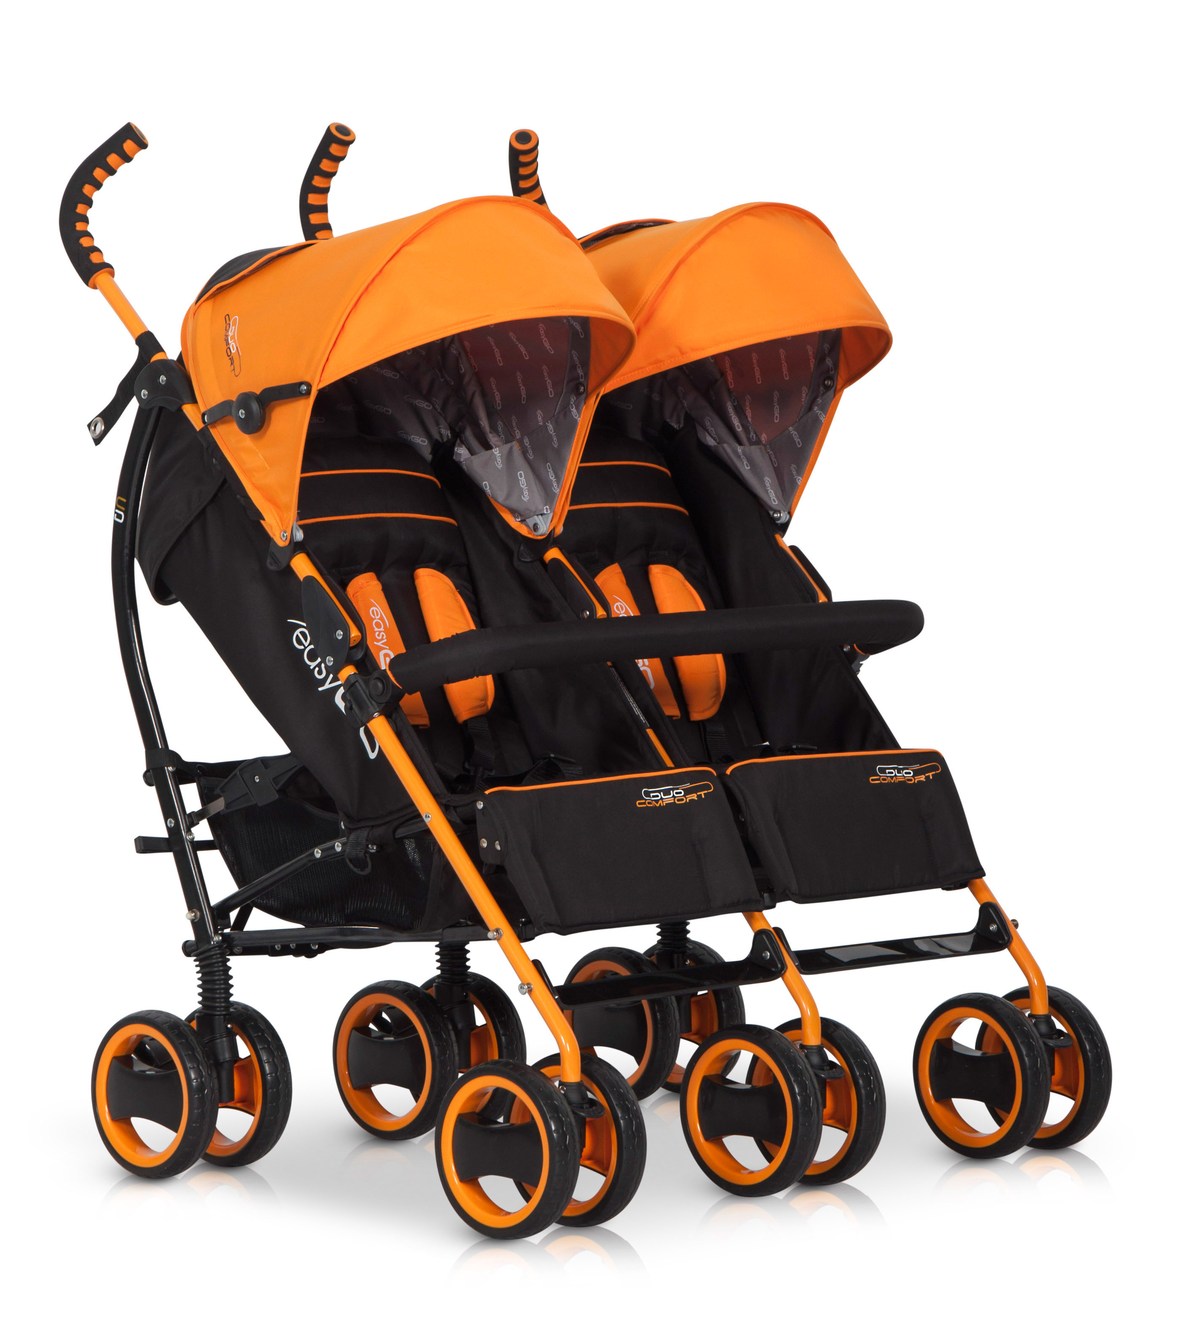 easygo-duo-comfort-stroller-reviews-questions-dimensions-pushchair